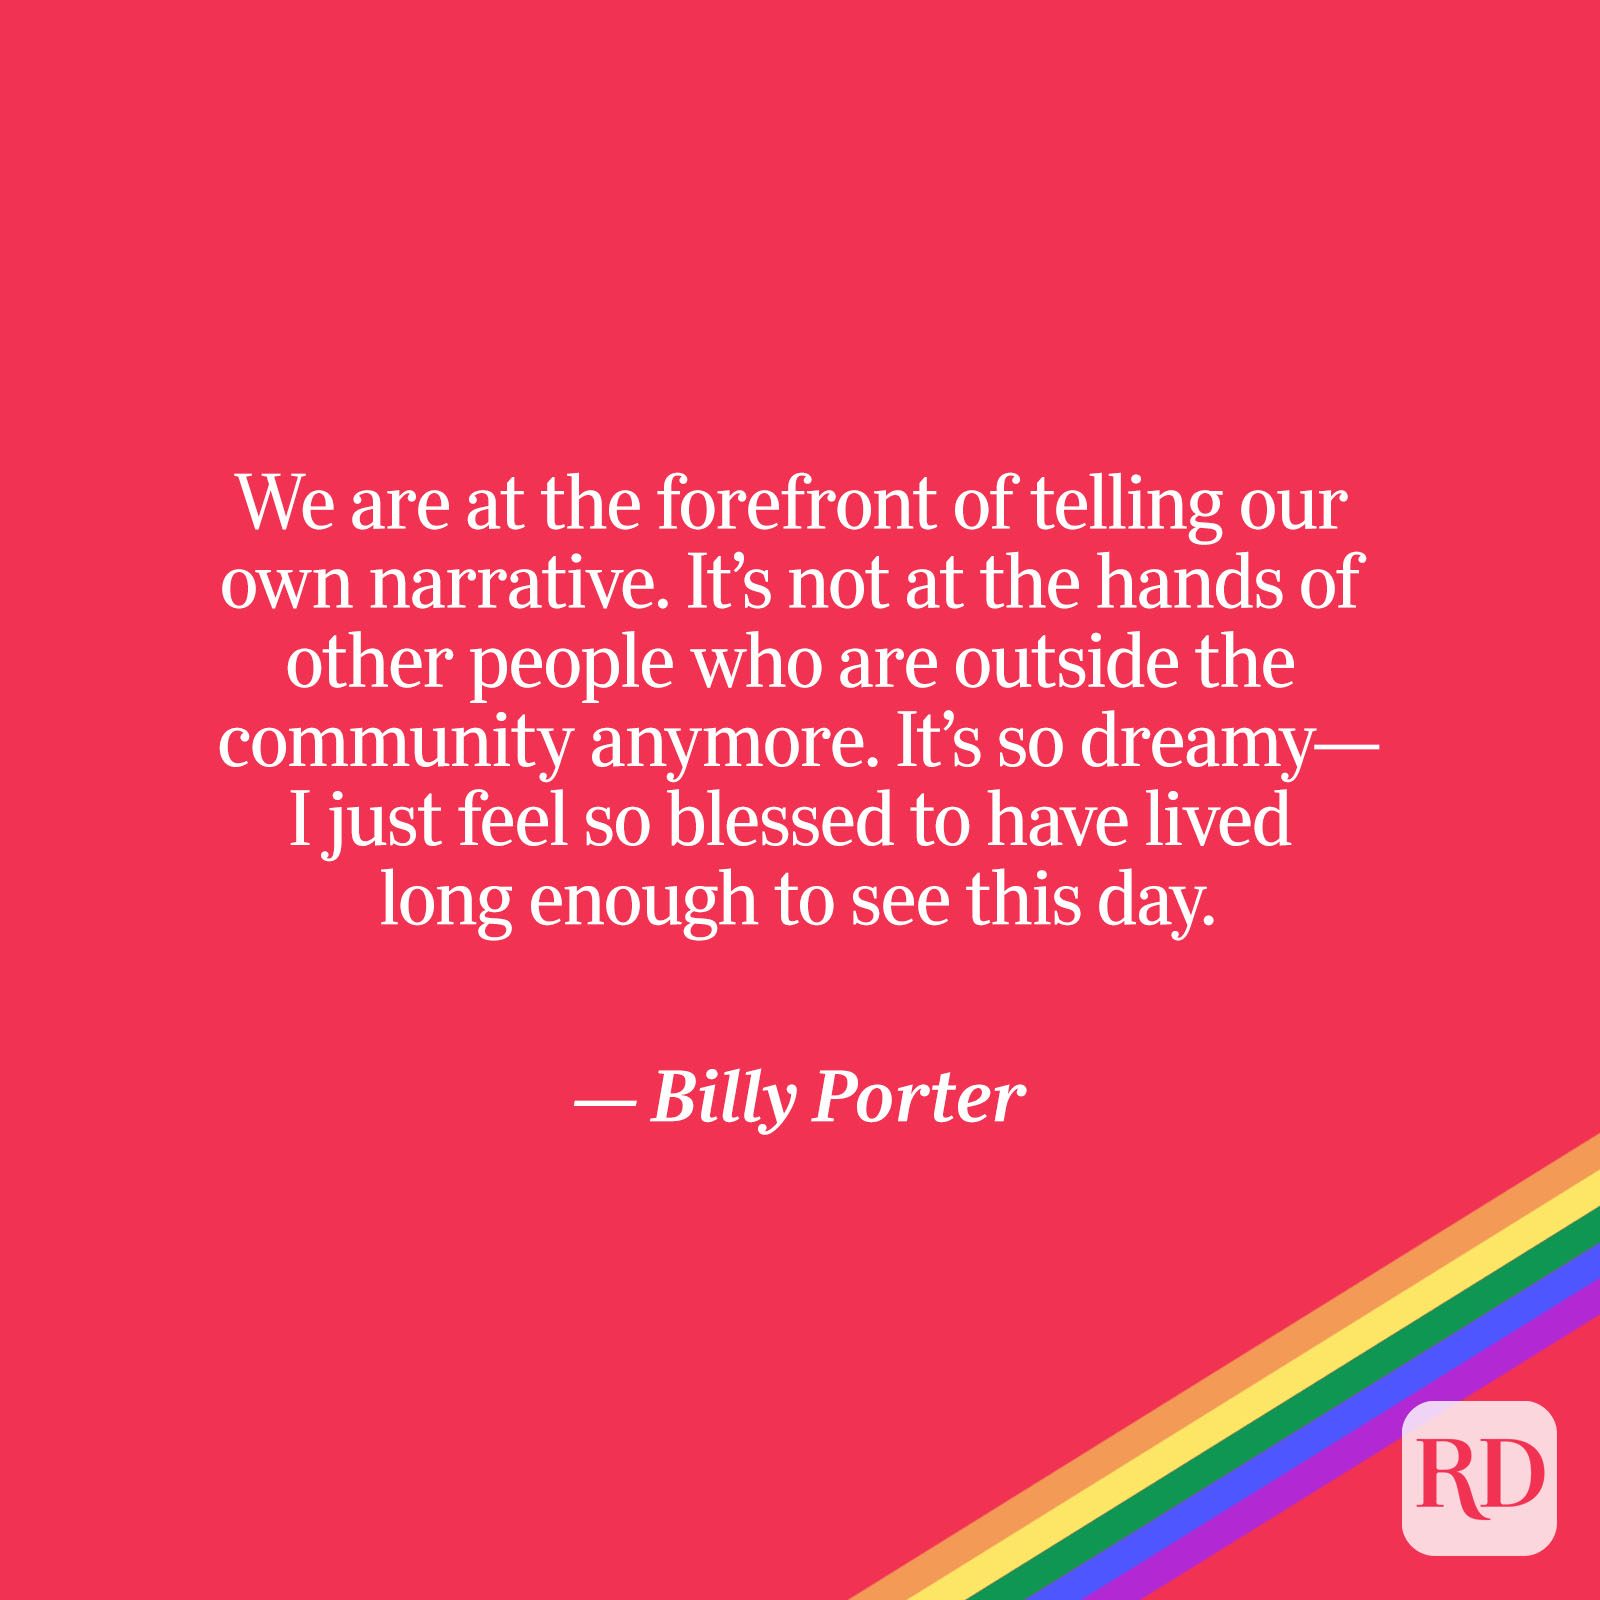 Porter quote on red with rainbow accent